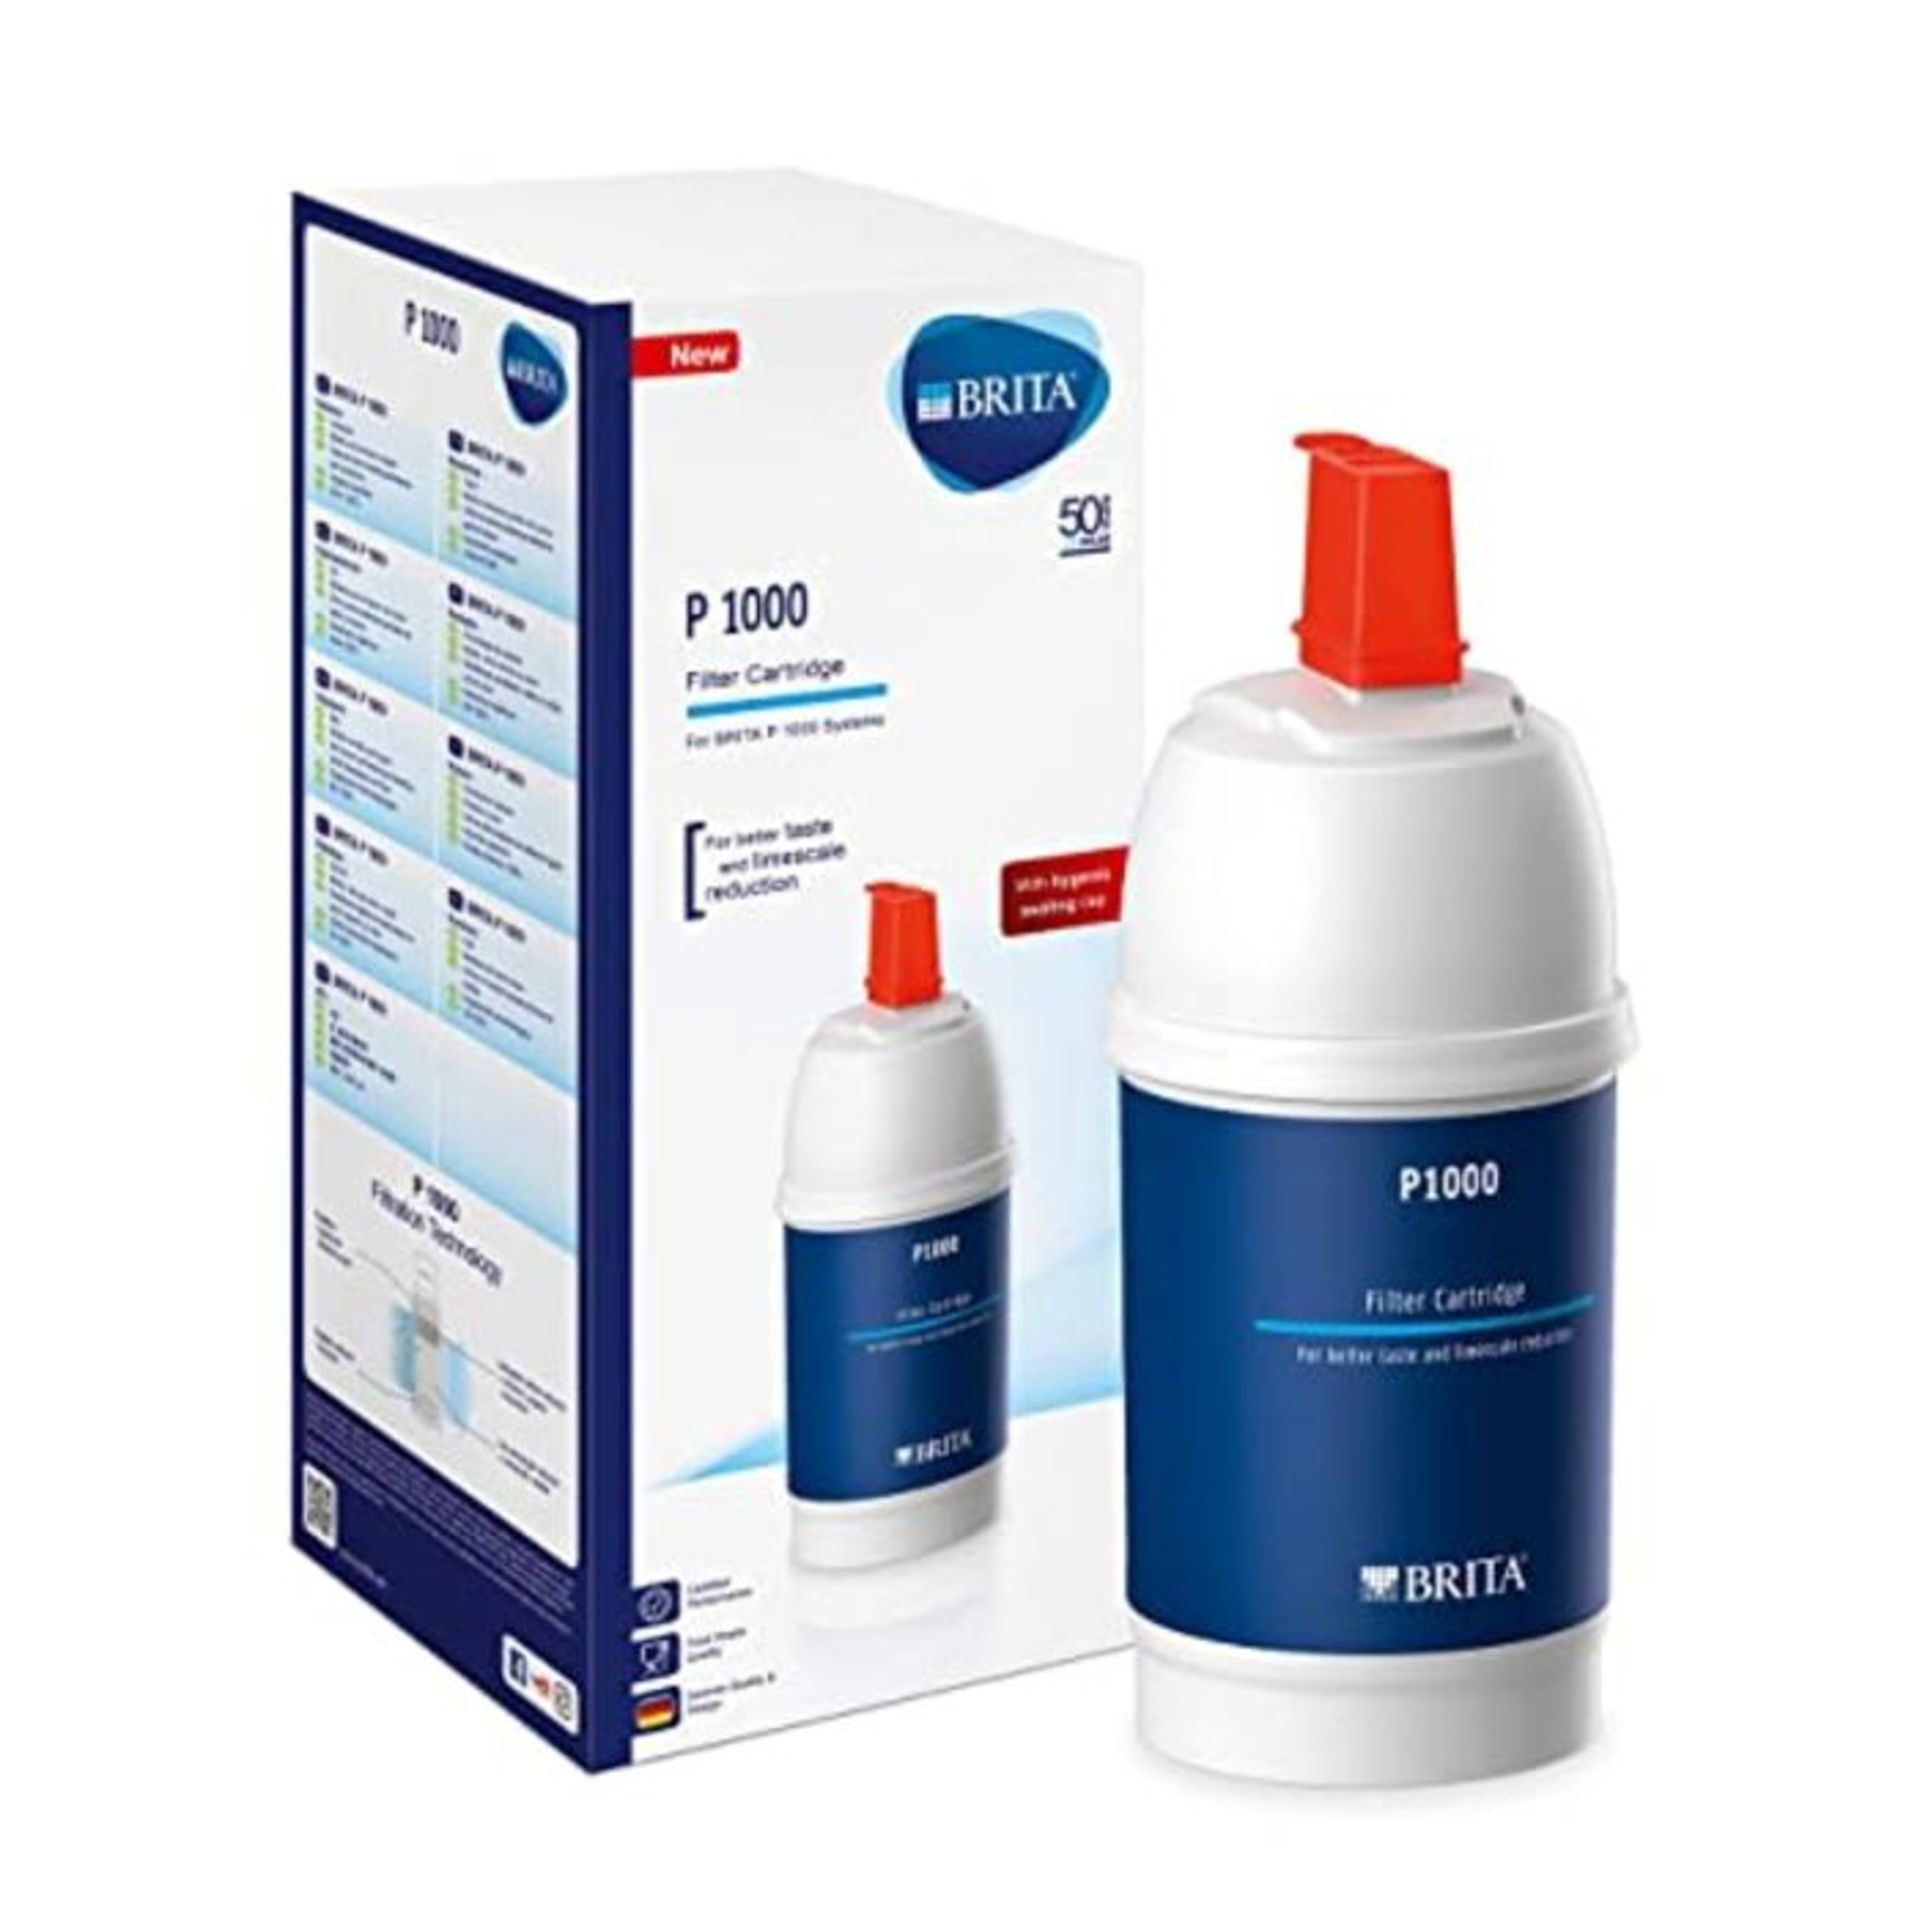 BRITA P1000 water filter cartridge, compatible with all BRITA filter taps for chlorine